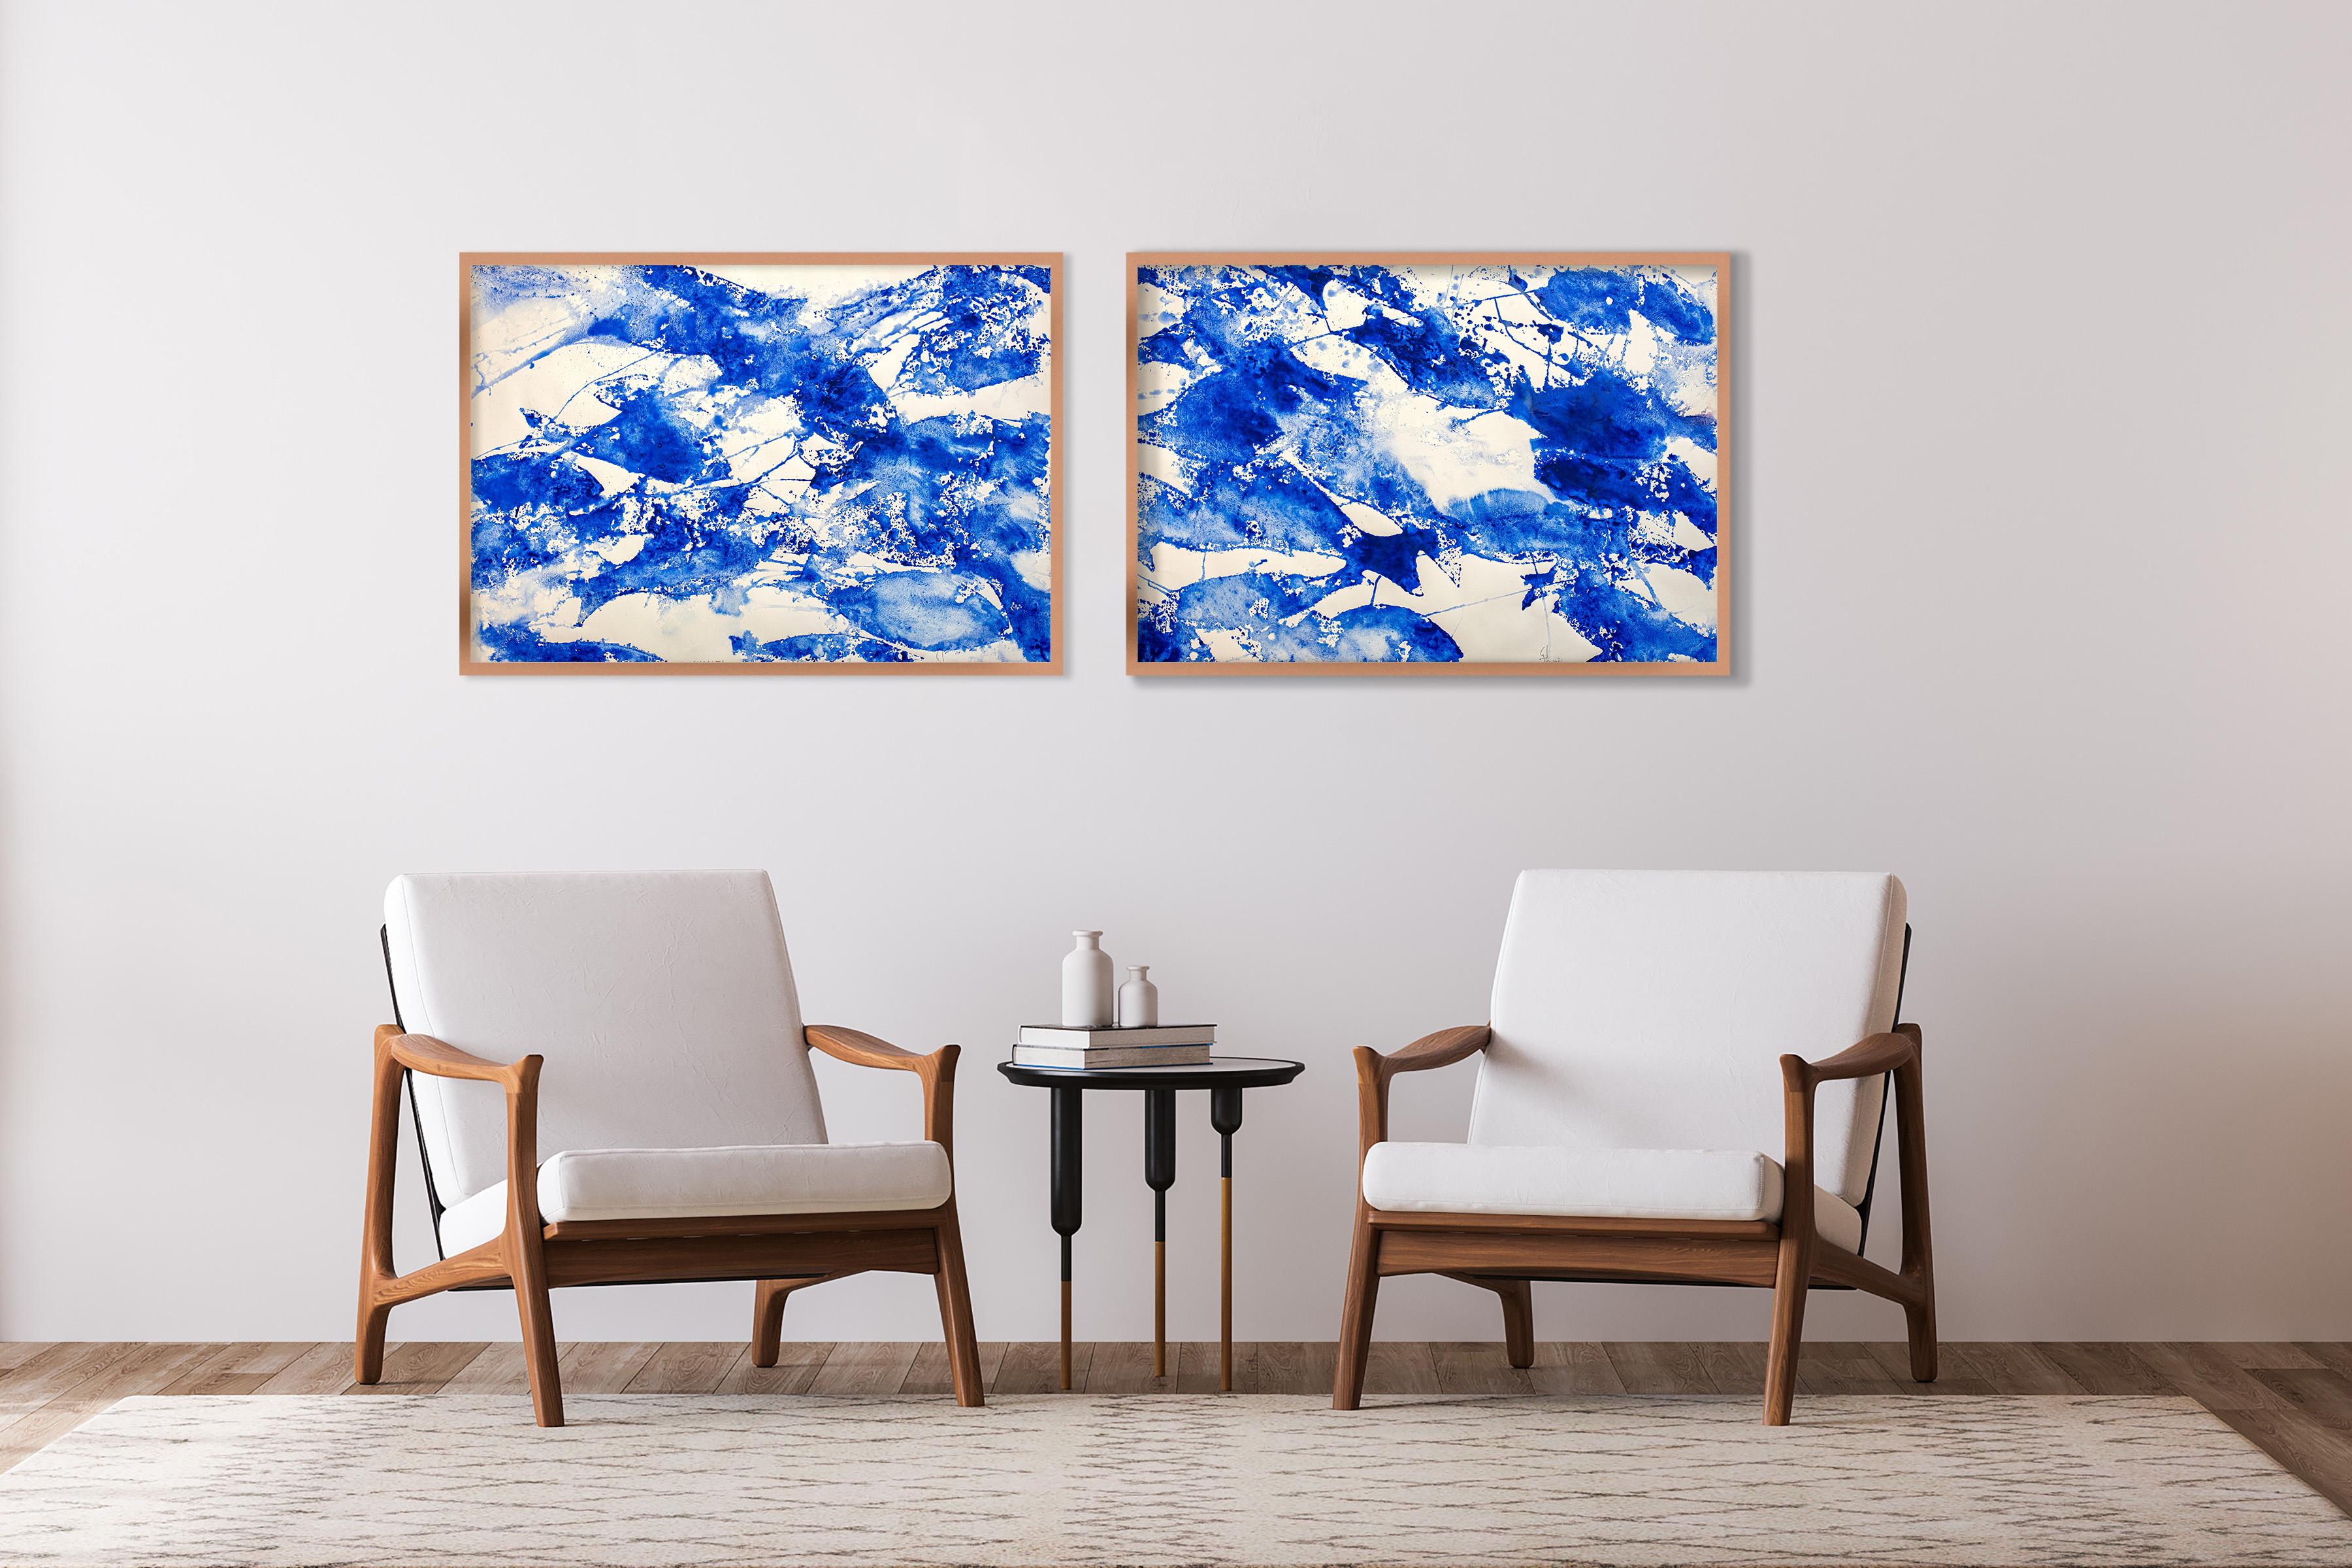 Sea of Blues Diptych, Abstract Blue & White Fish Patterns, Mediterranean Style  - Painting by Enric Servera